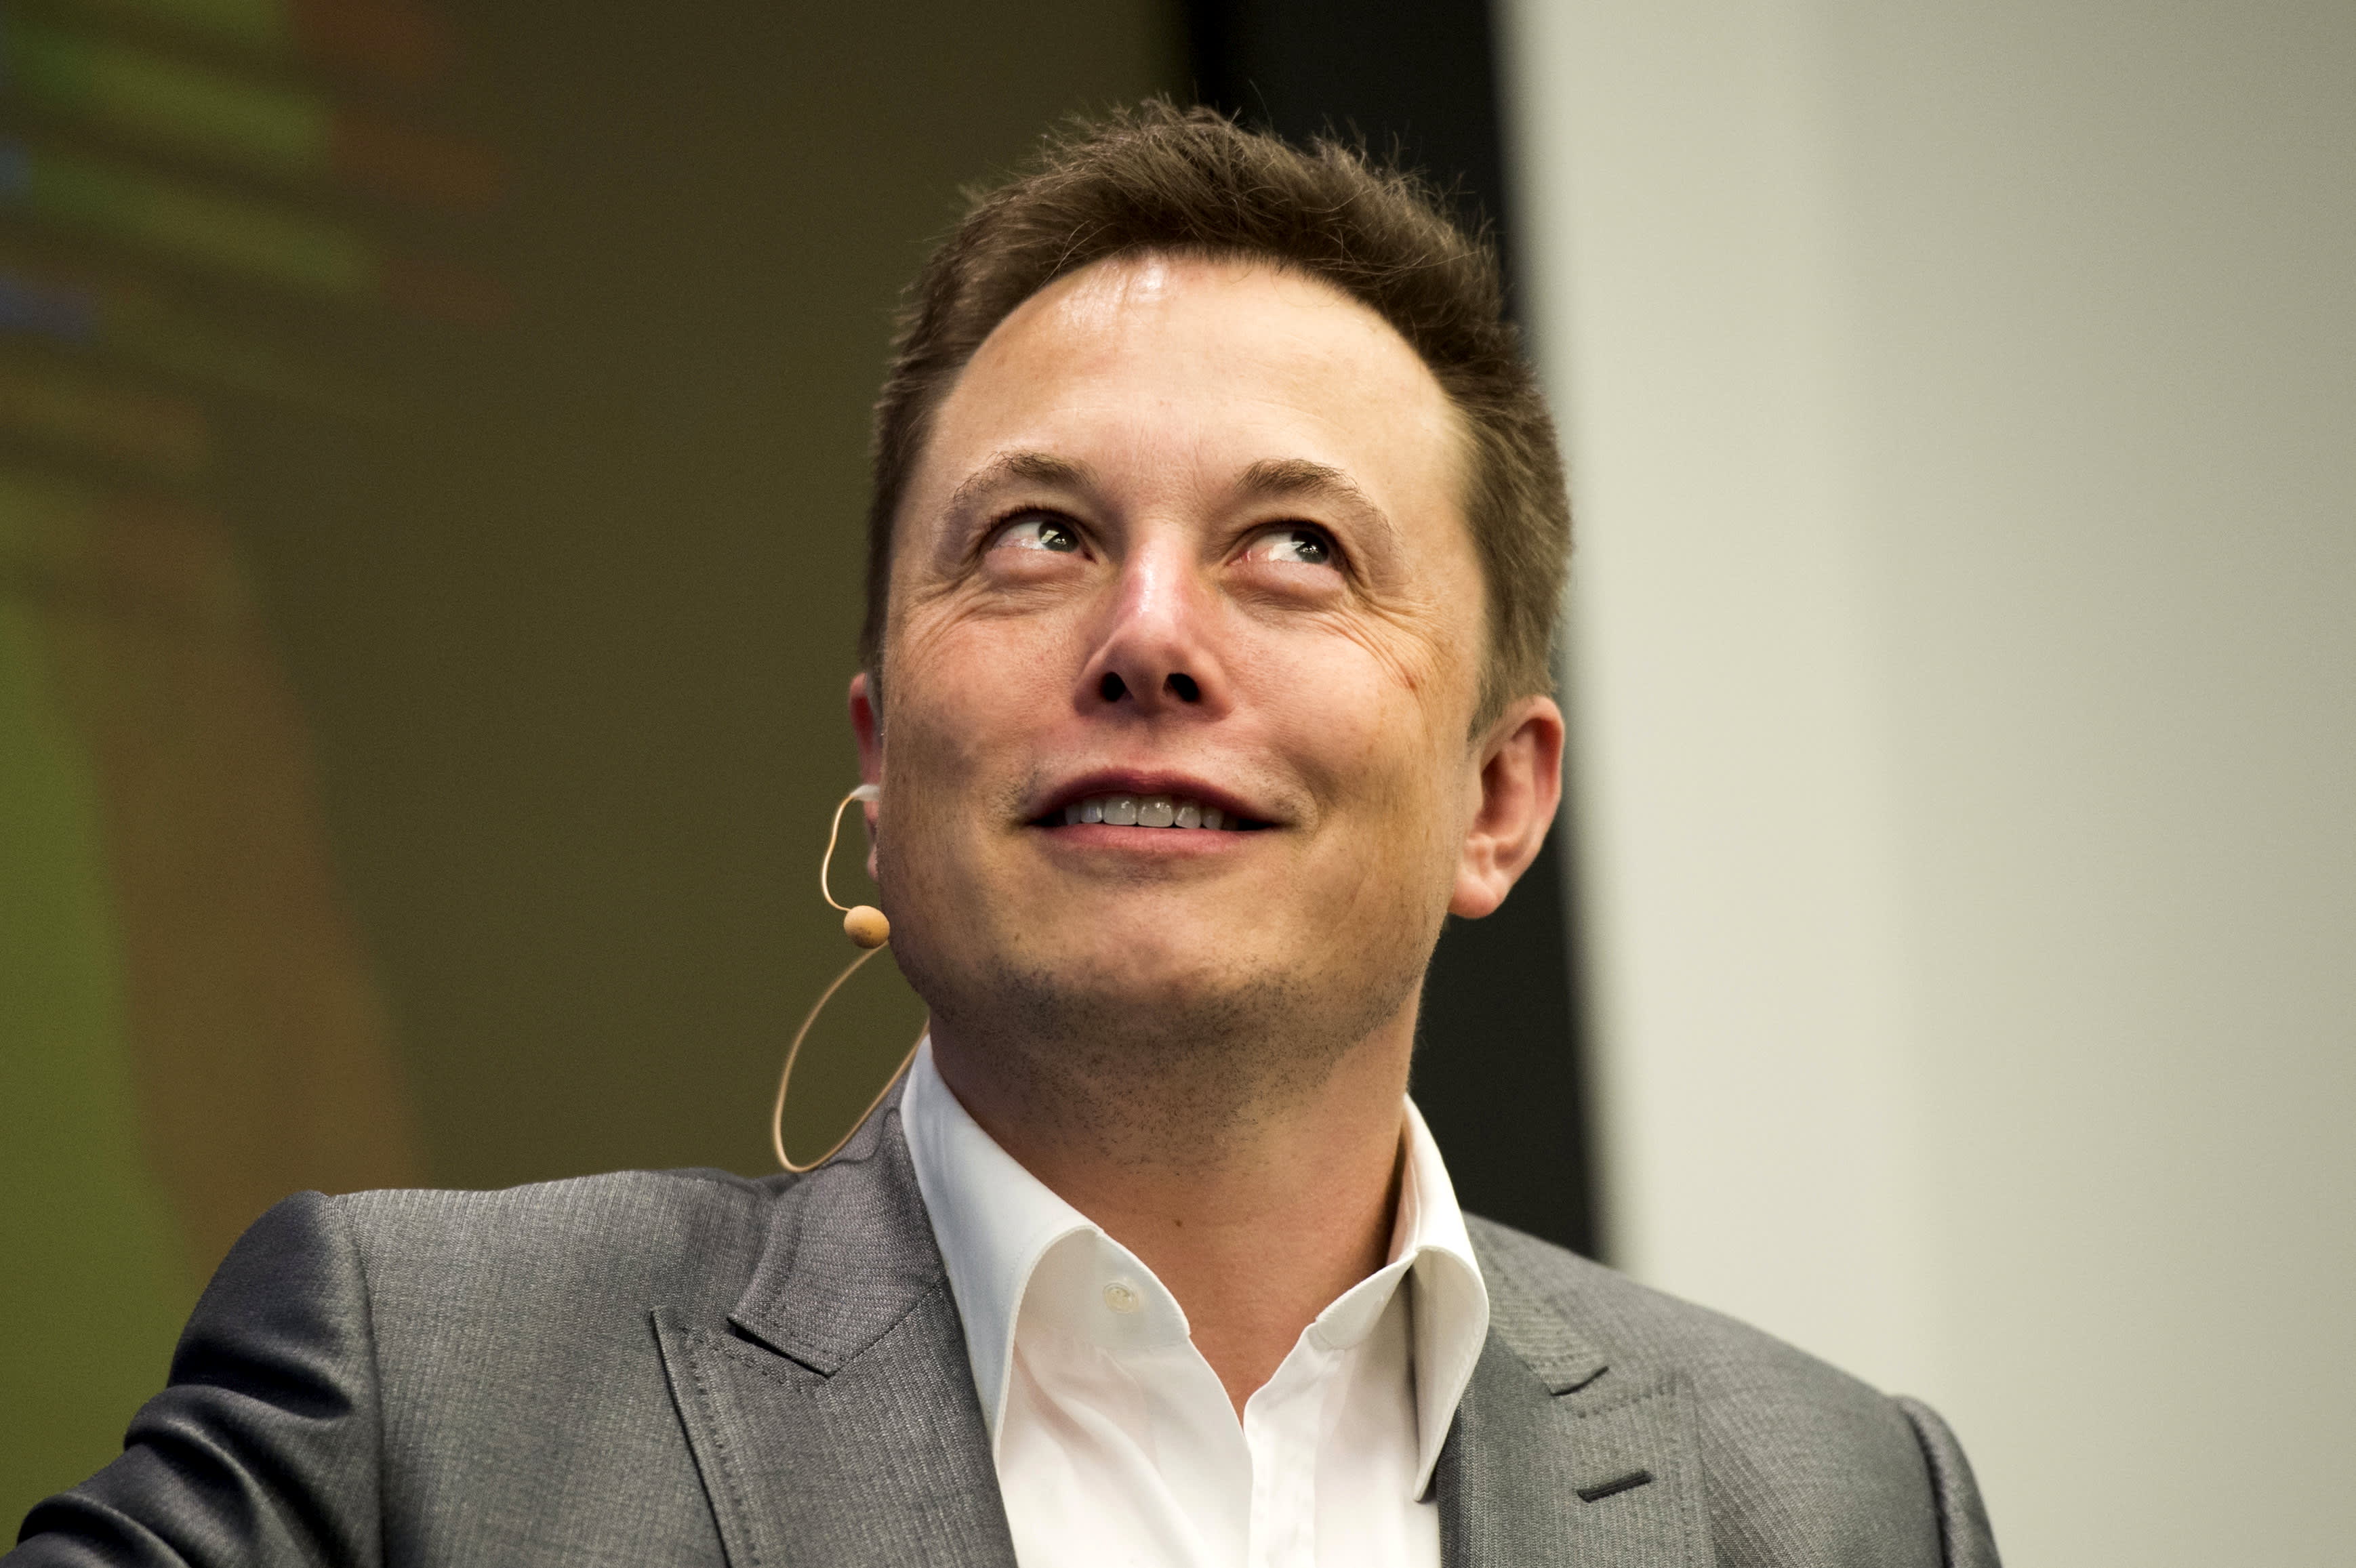 The tactics Elon Musk uses to motivate his teams